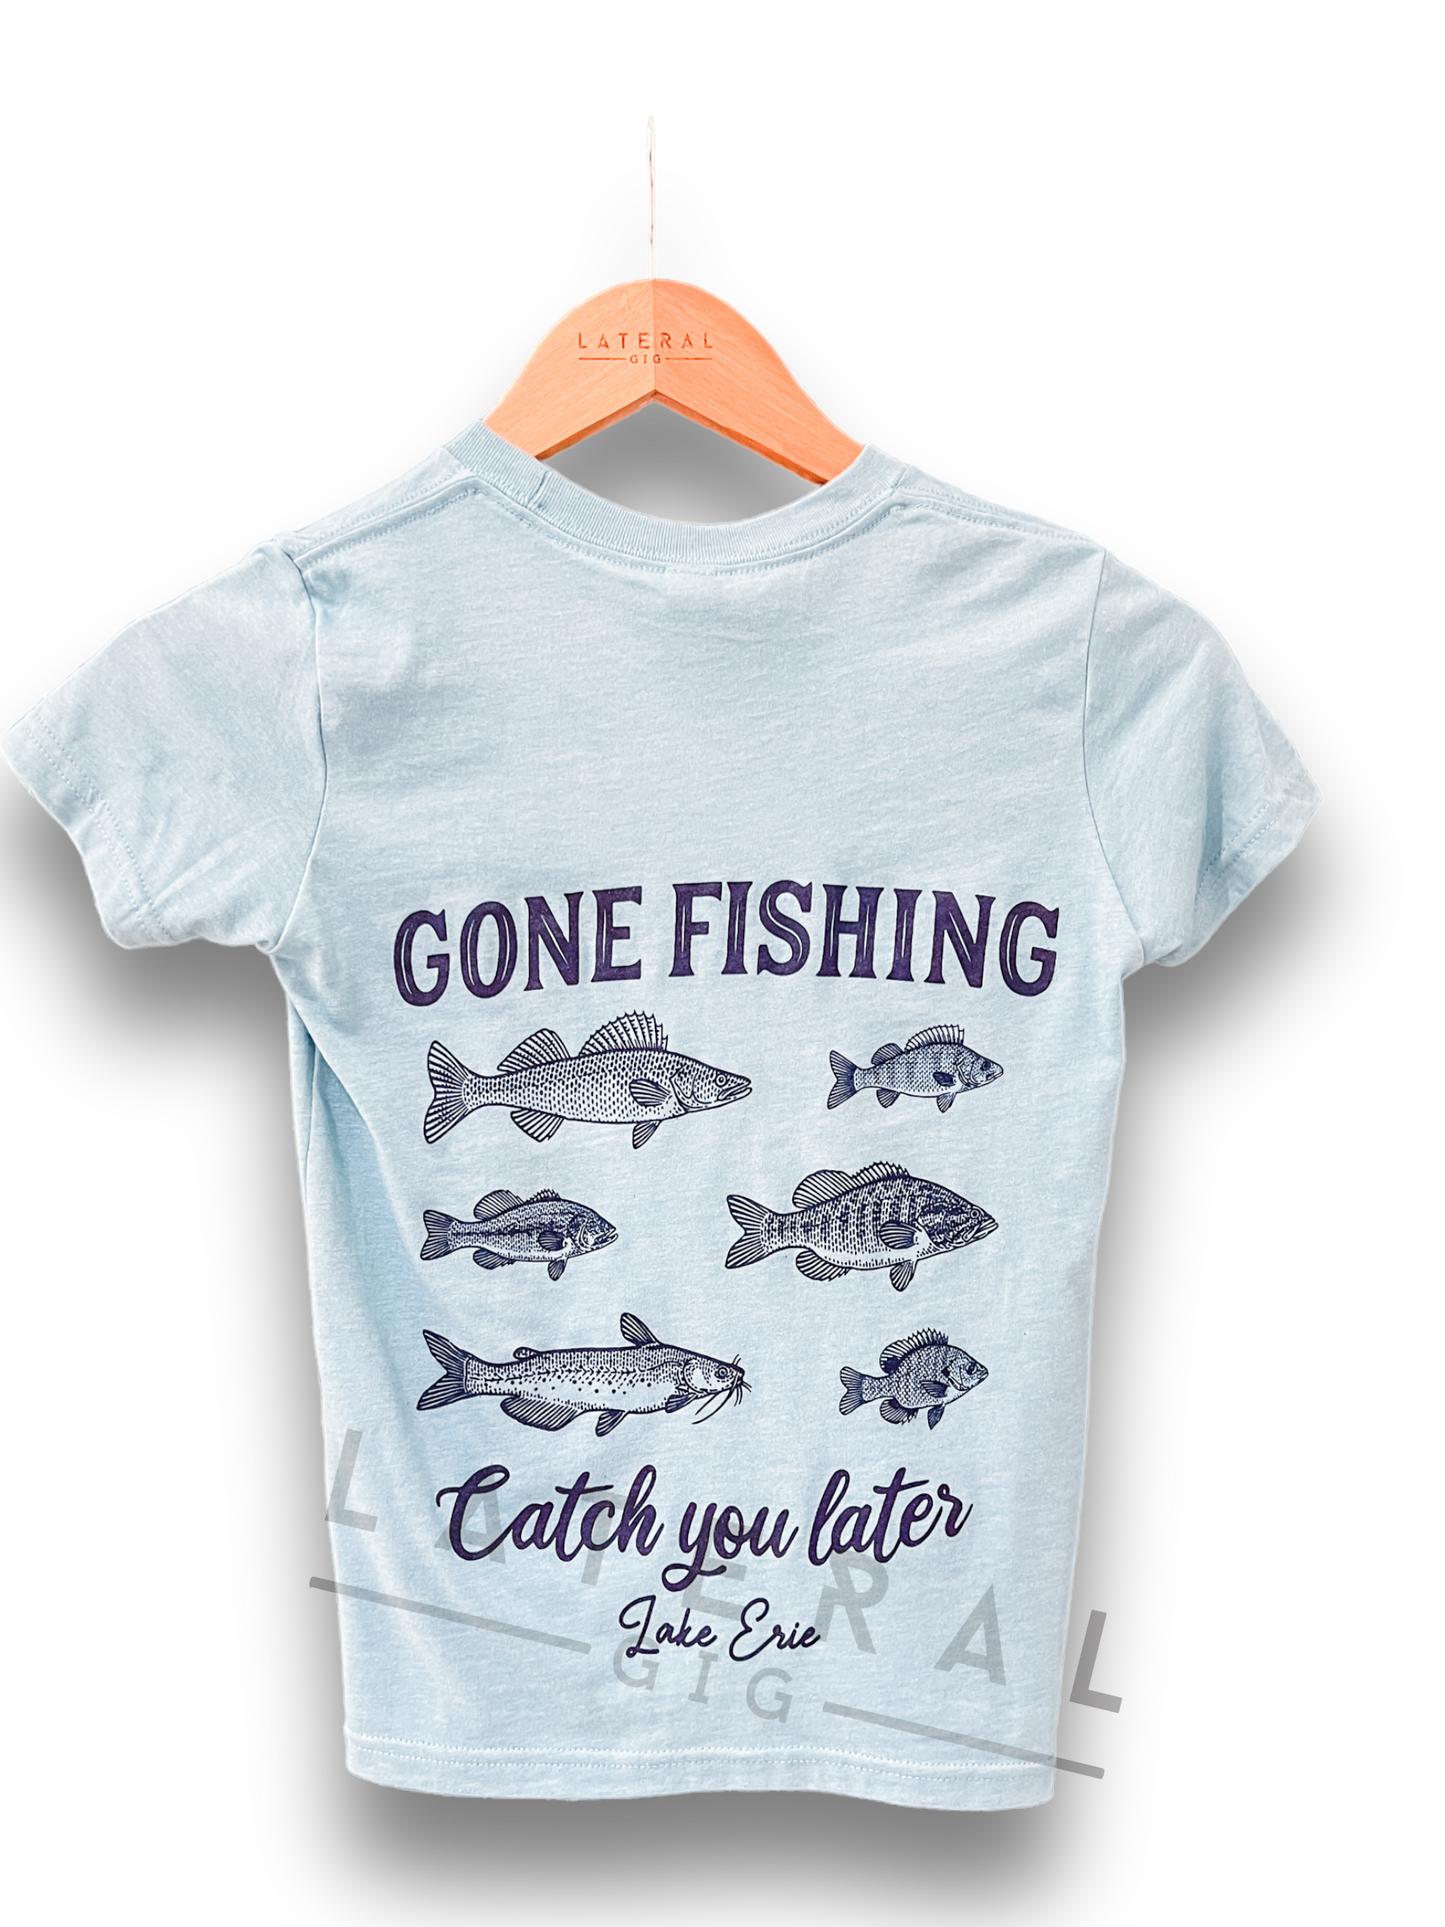 Gone Fishing, Catch You Later Tee!